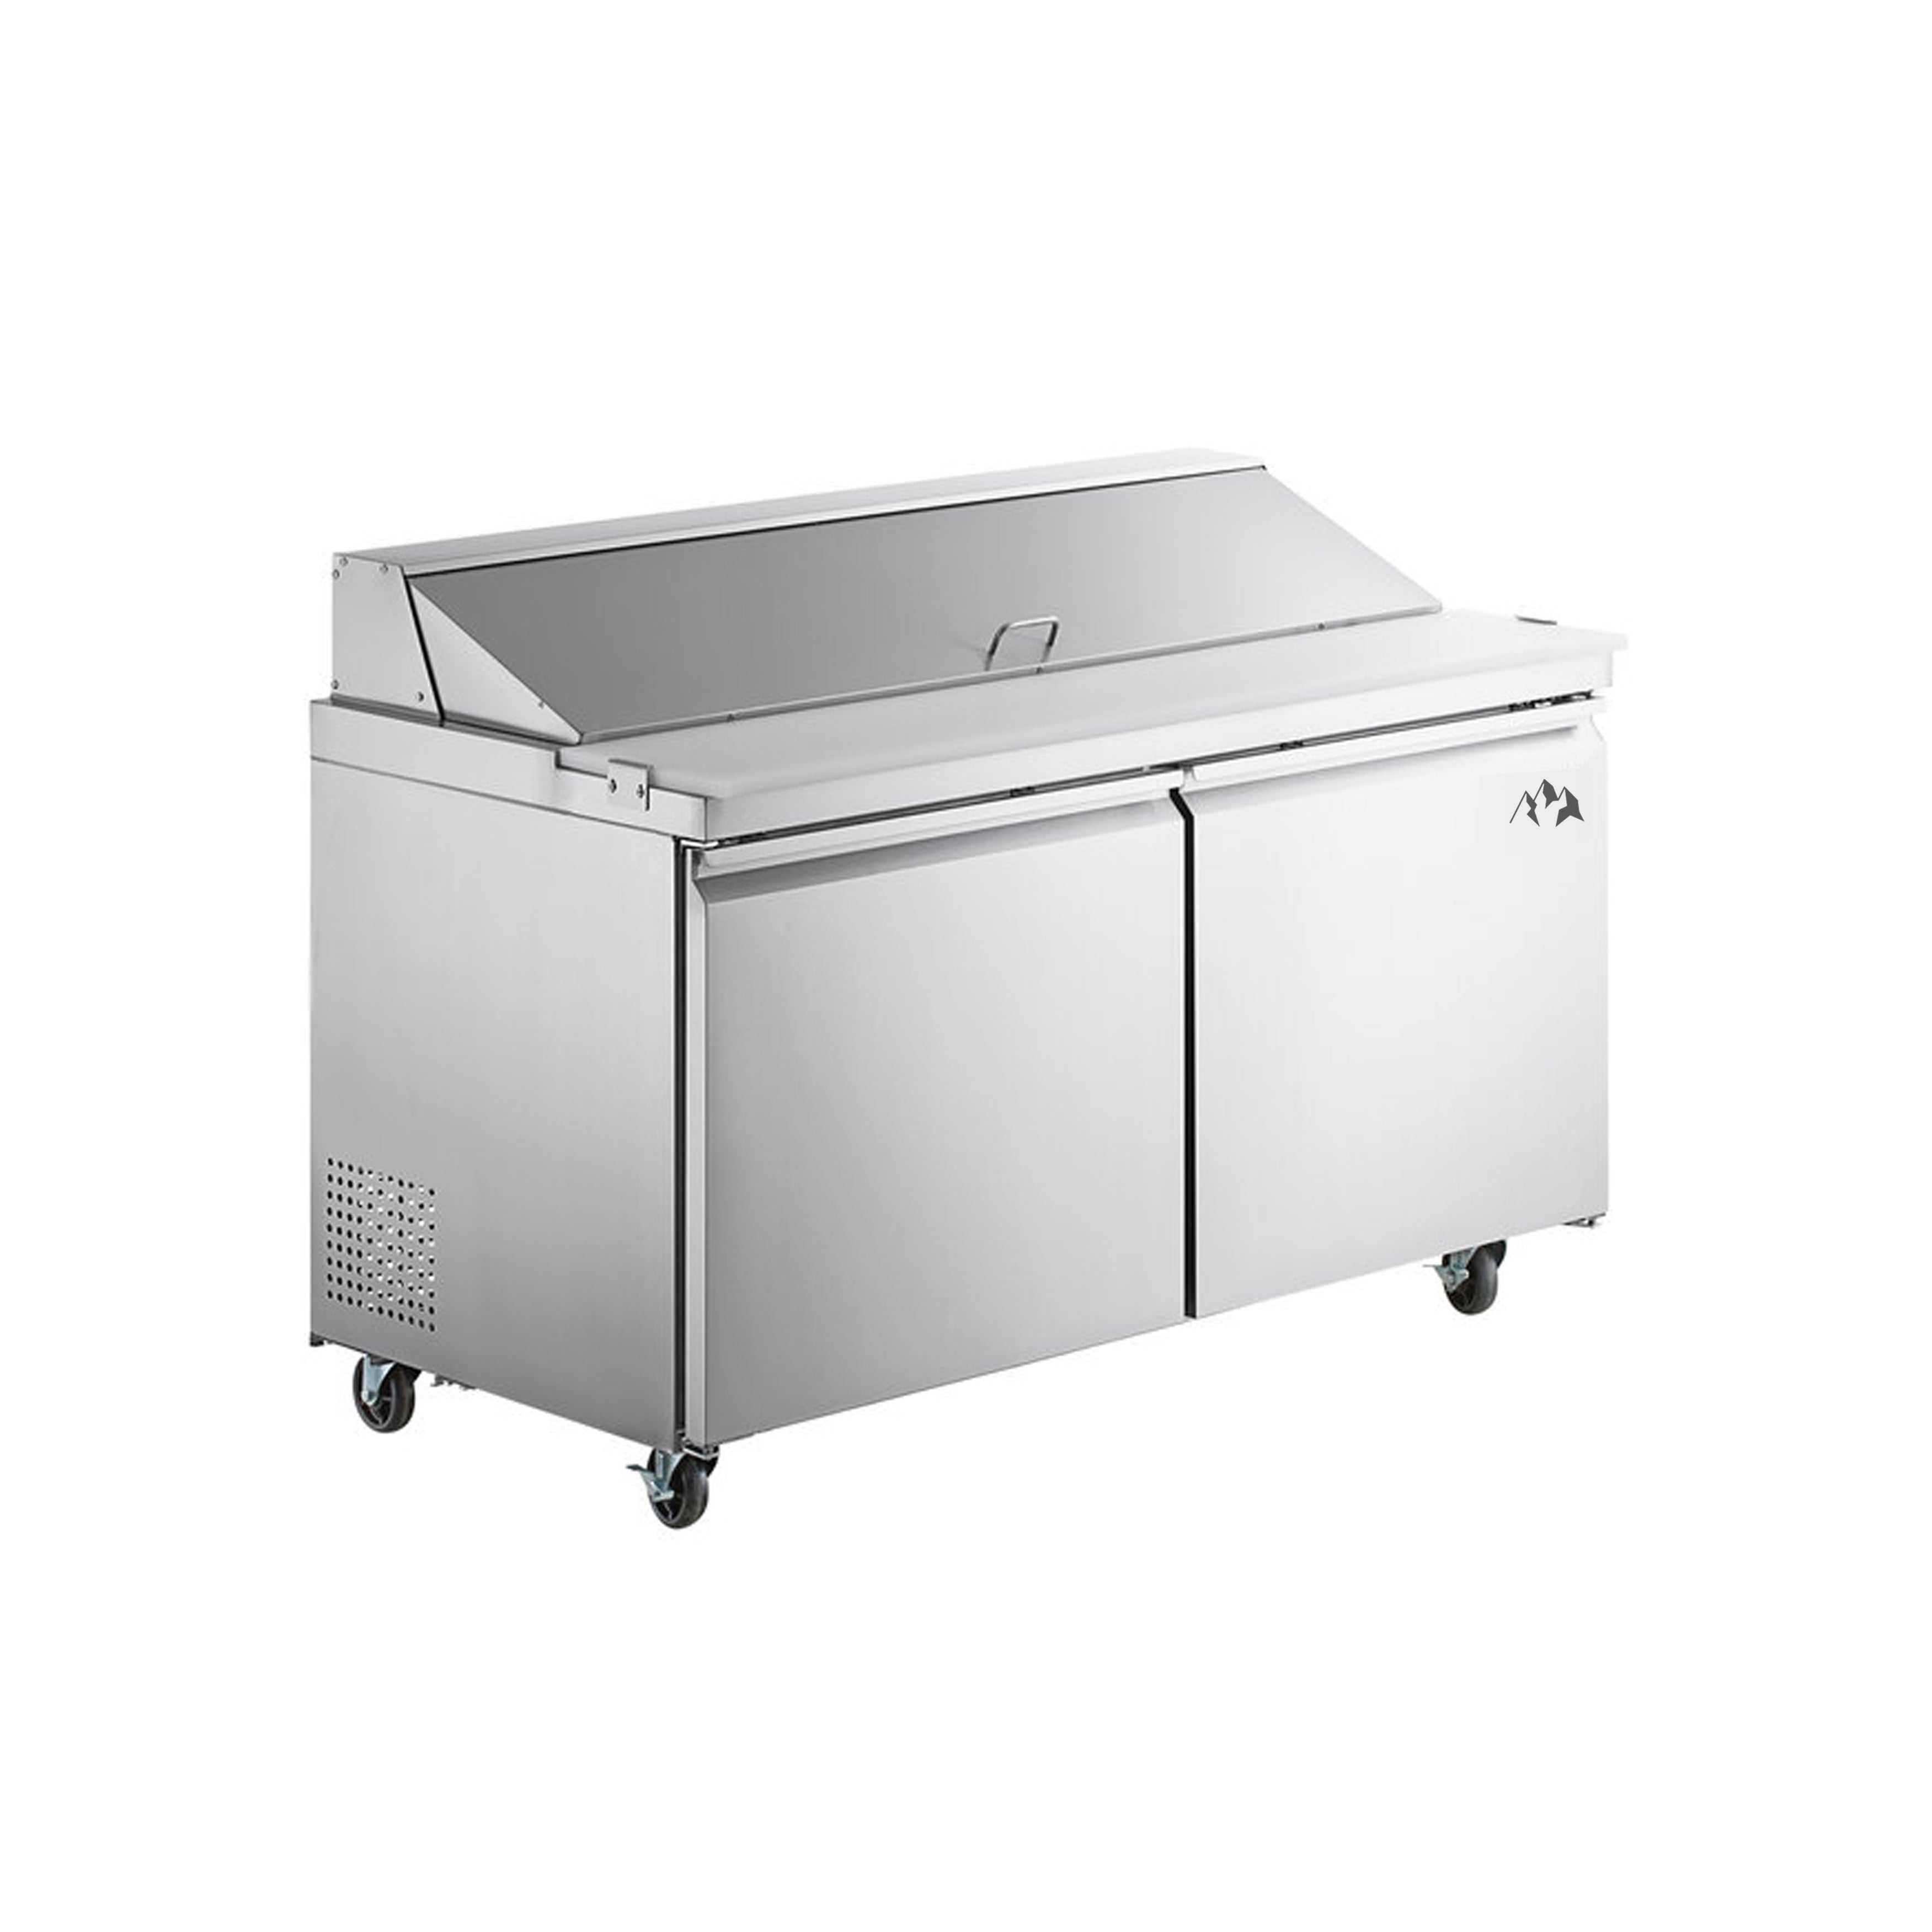 Chef AAA - SS-PT-60-HC, Commercial 60" Sandwich Prep Table Refrigerator 16 Pans 2 Door Stainless Steel 15 cu.ft.